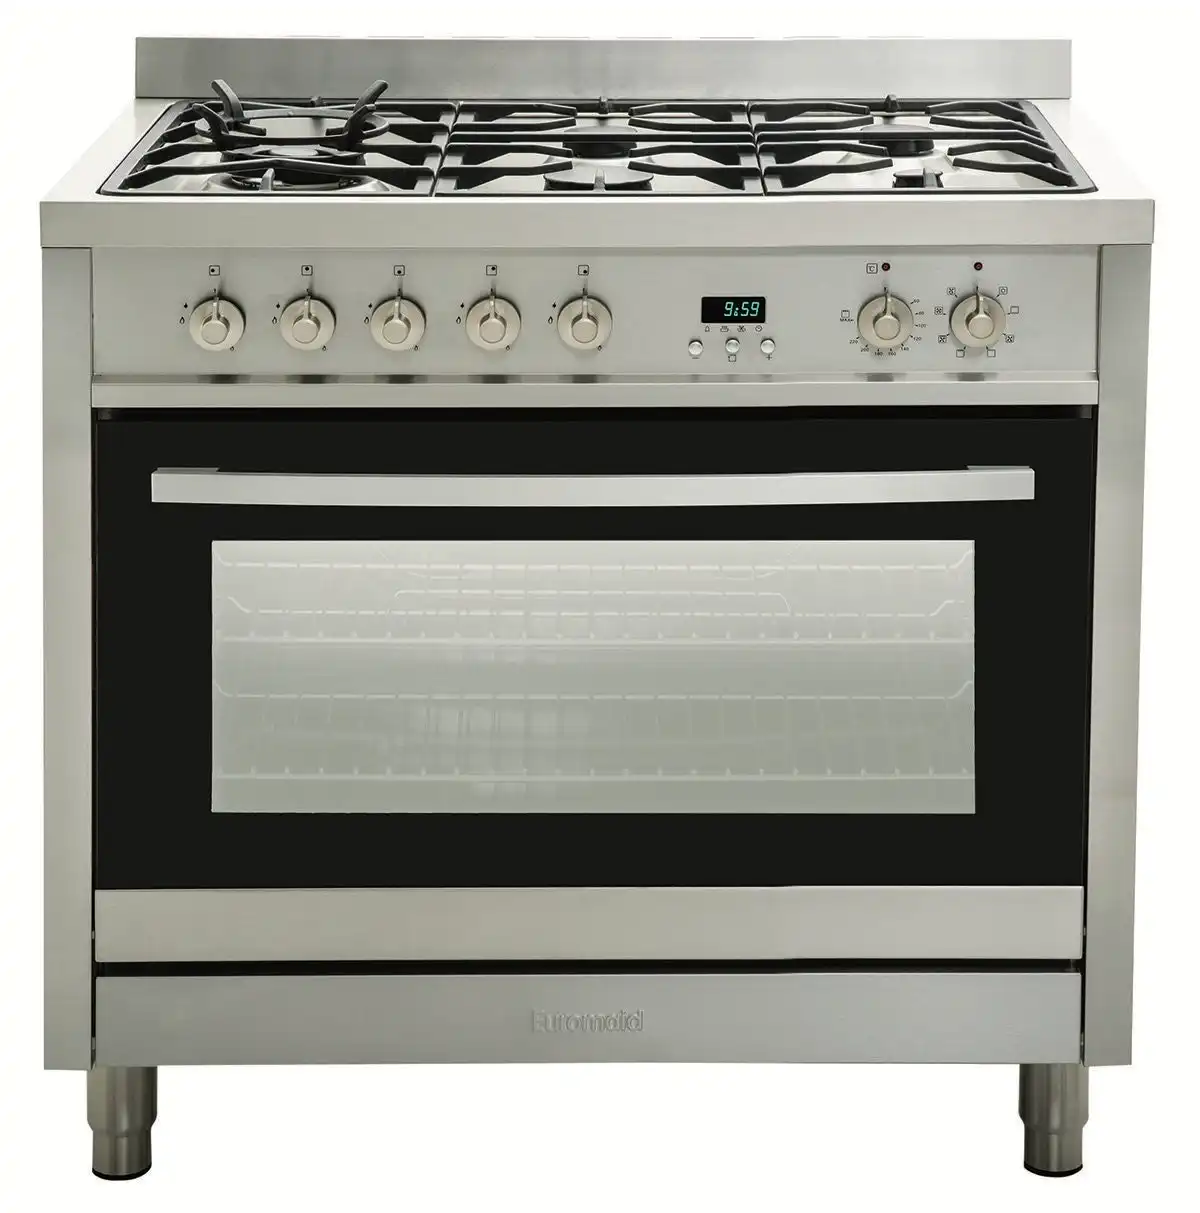 Euromaid 90cm Freestanding Dual Fuel Oven/Stove